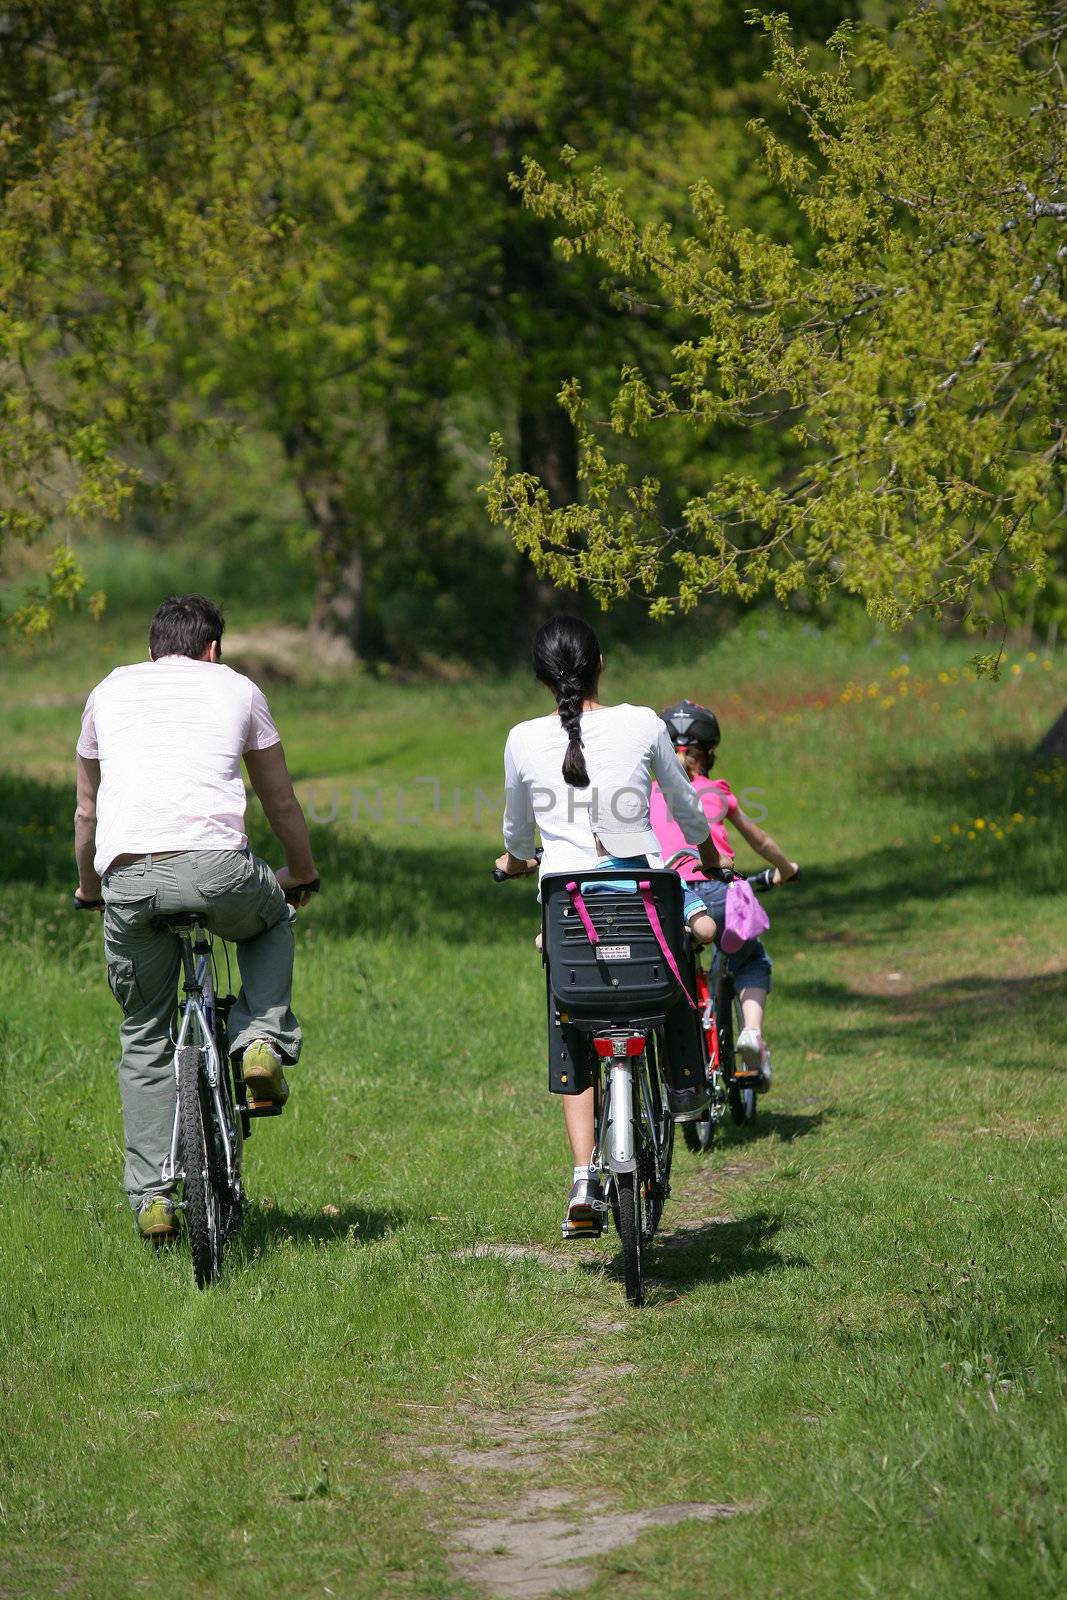 Family bike ride by phovoir